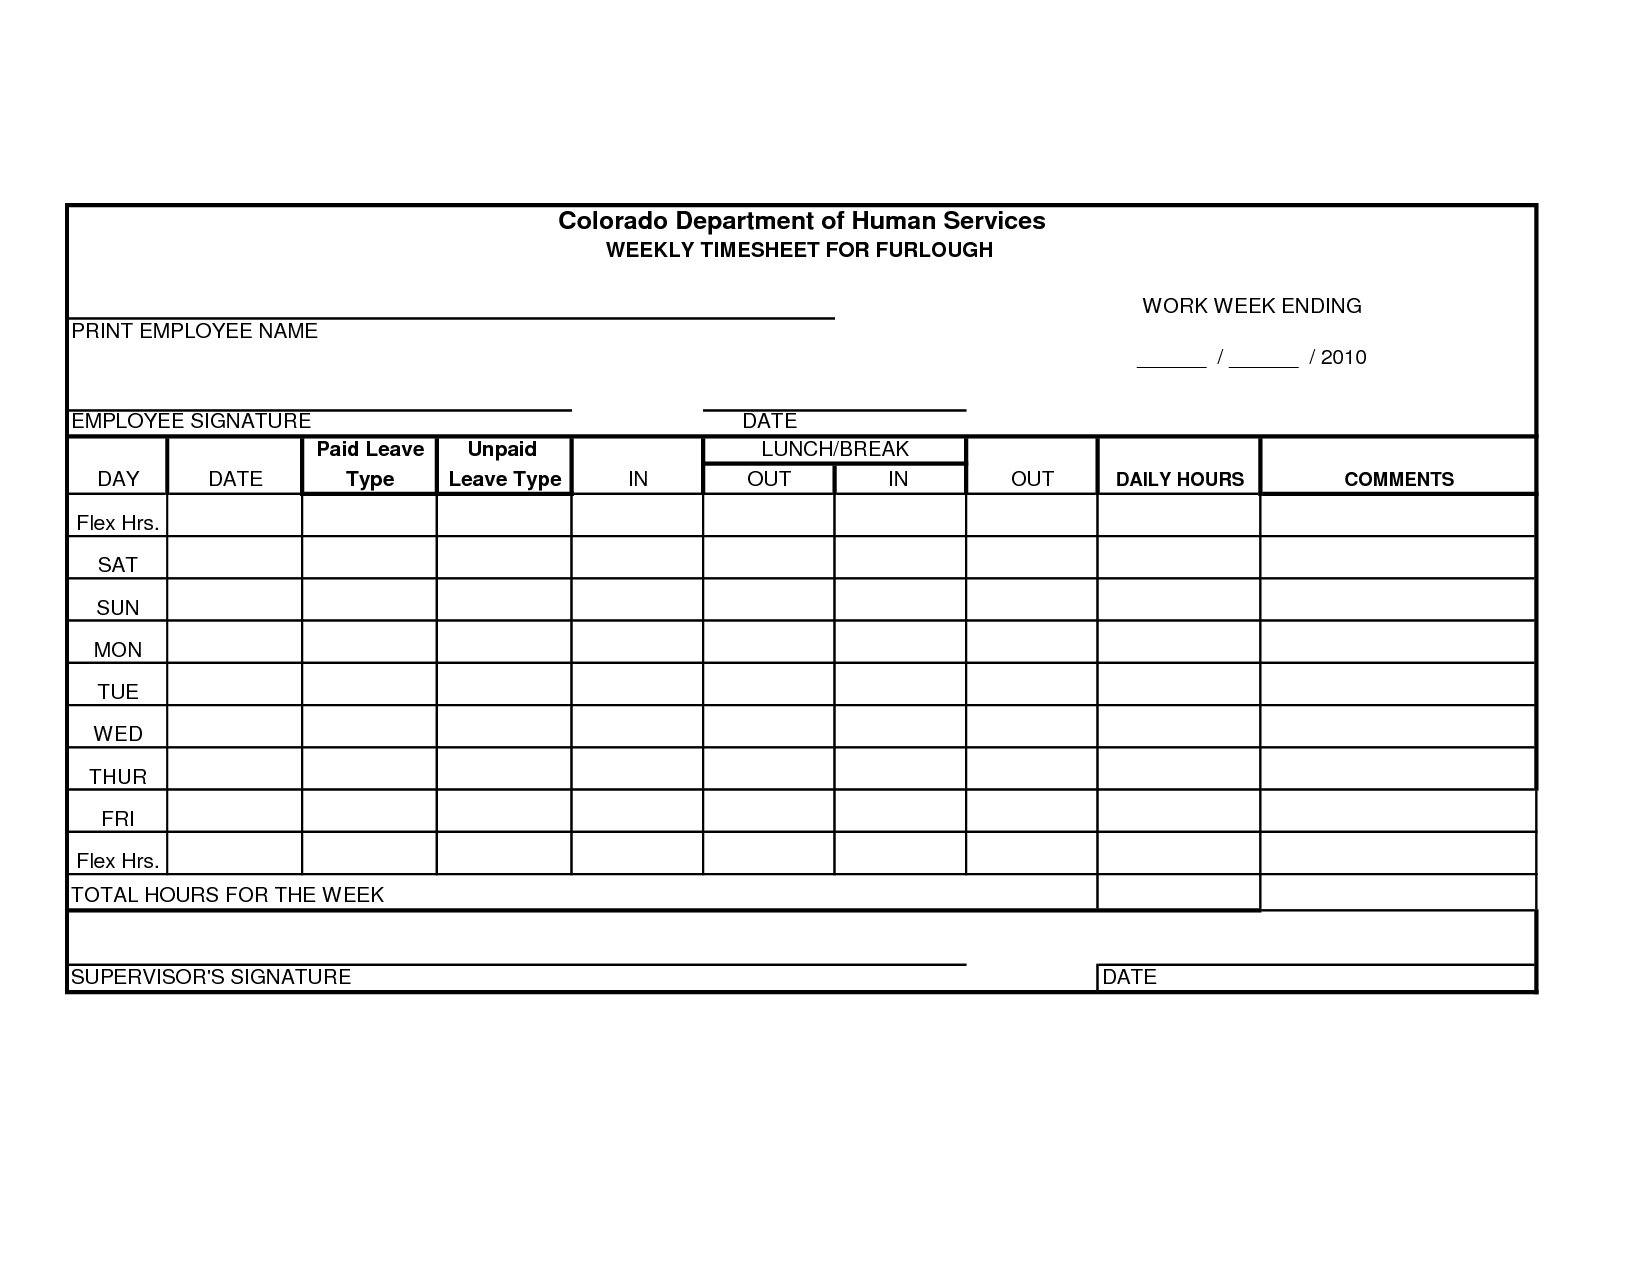 Free Printable Time Sheets Forms | Furlough Weekly Time Sheet - Free Printable Time Sheets